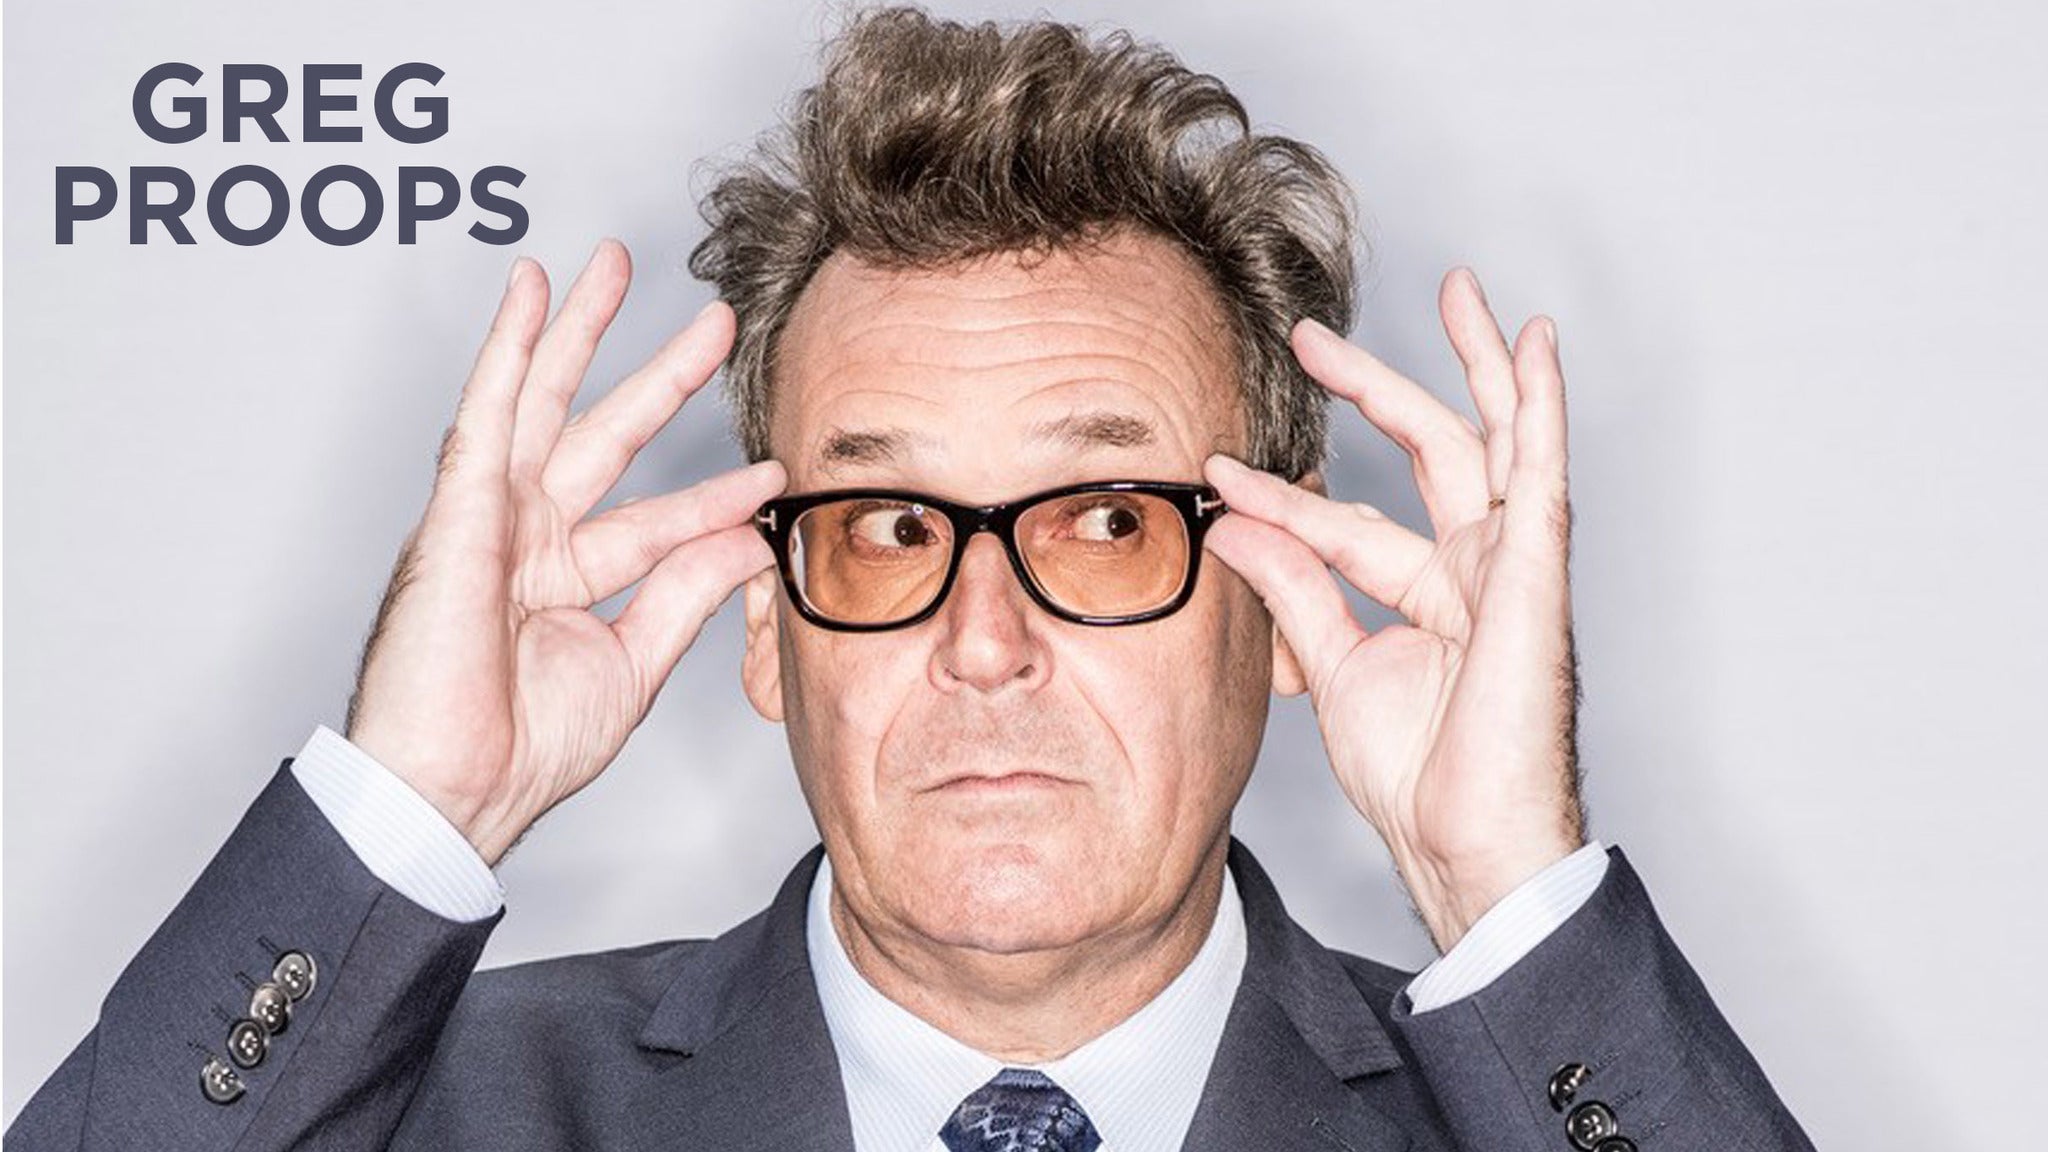 Greg Proops - New Year's Eve - San Francisco, CA 94111